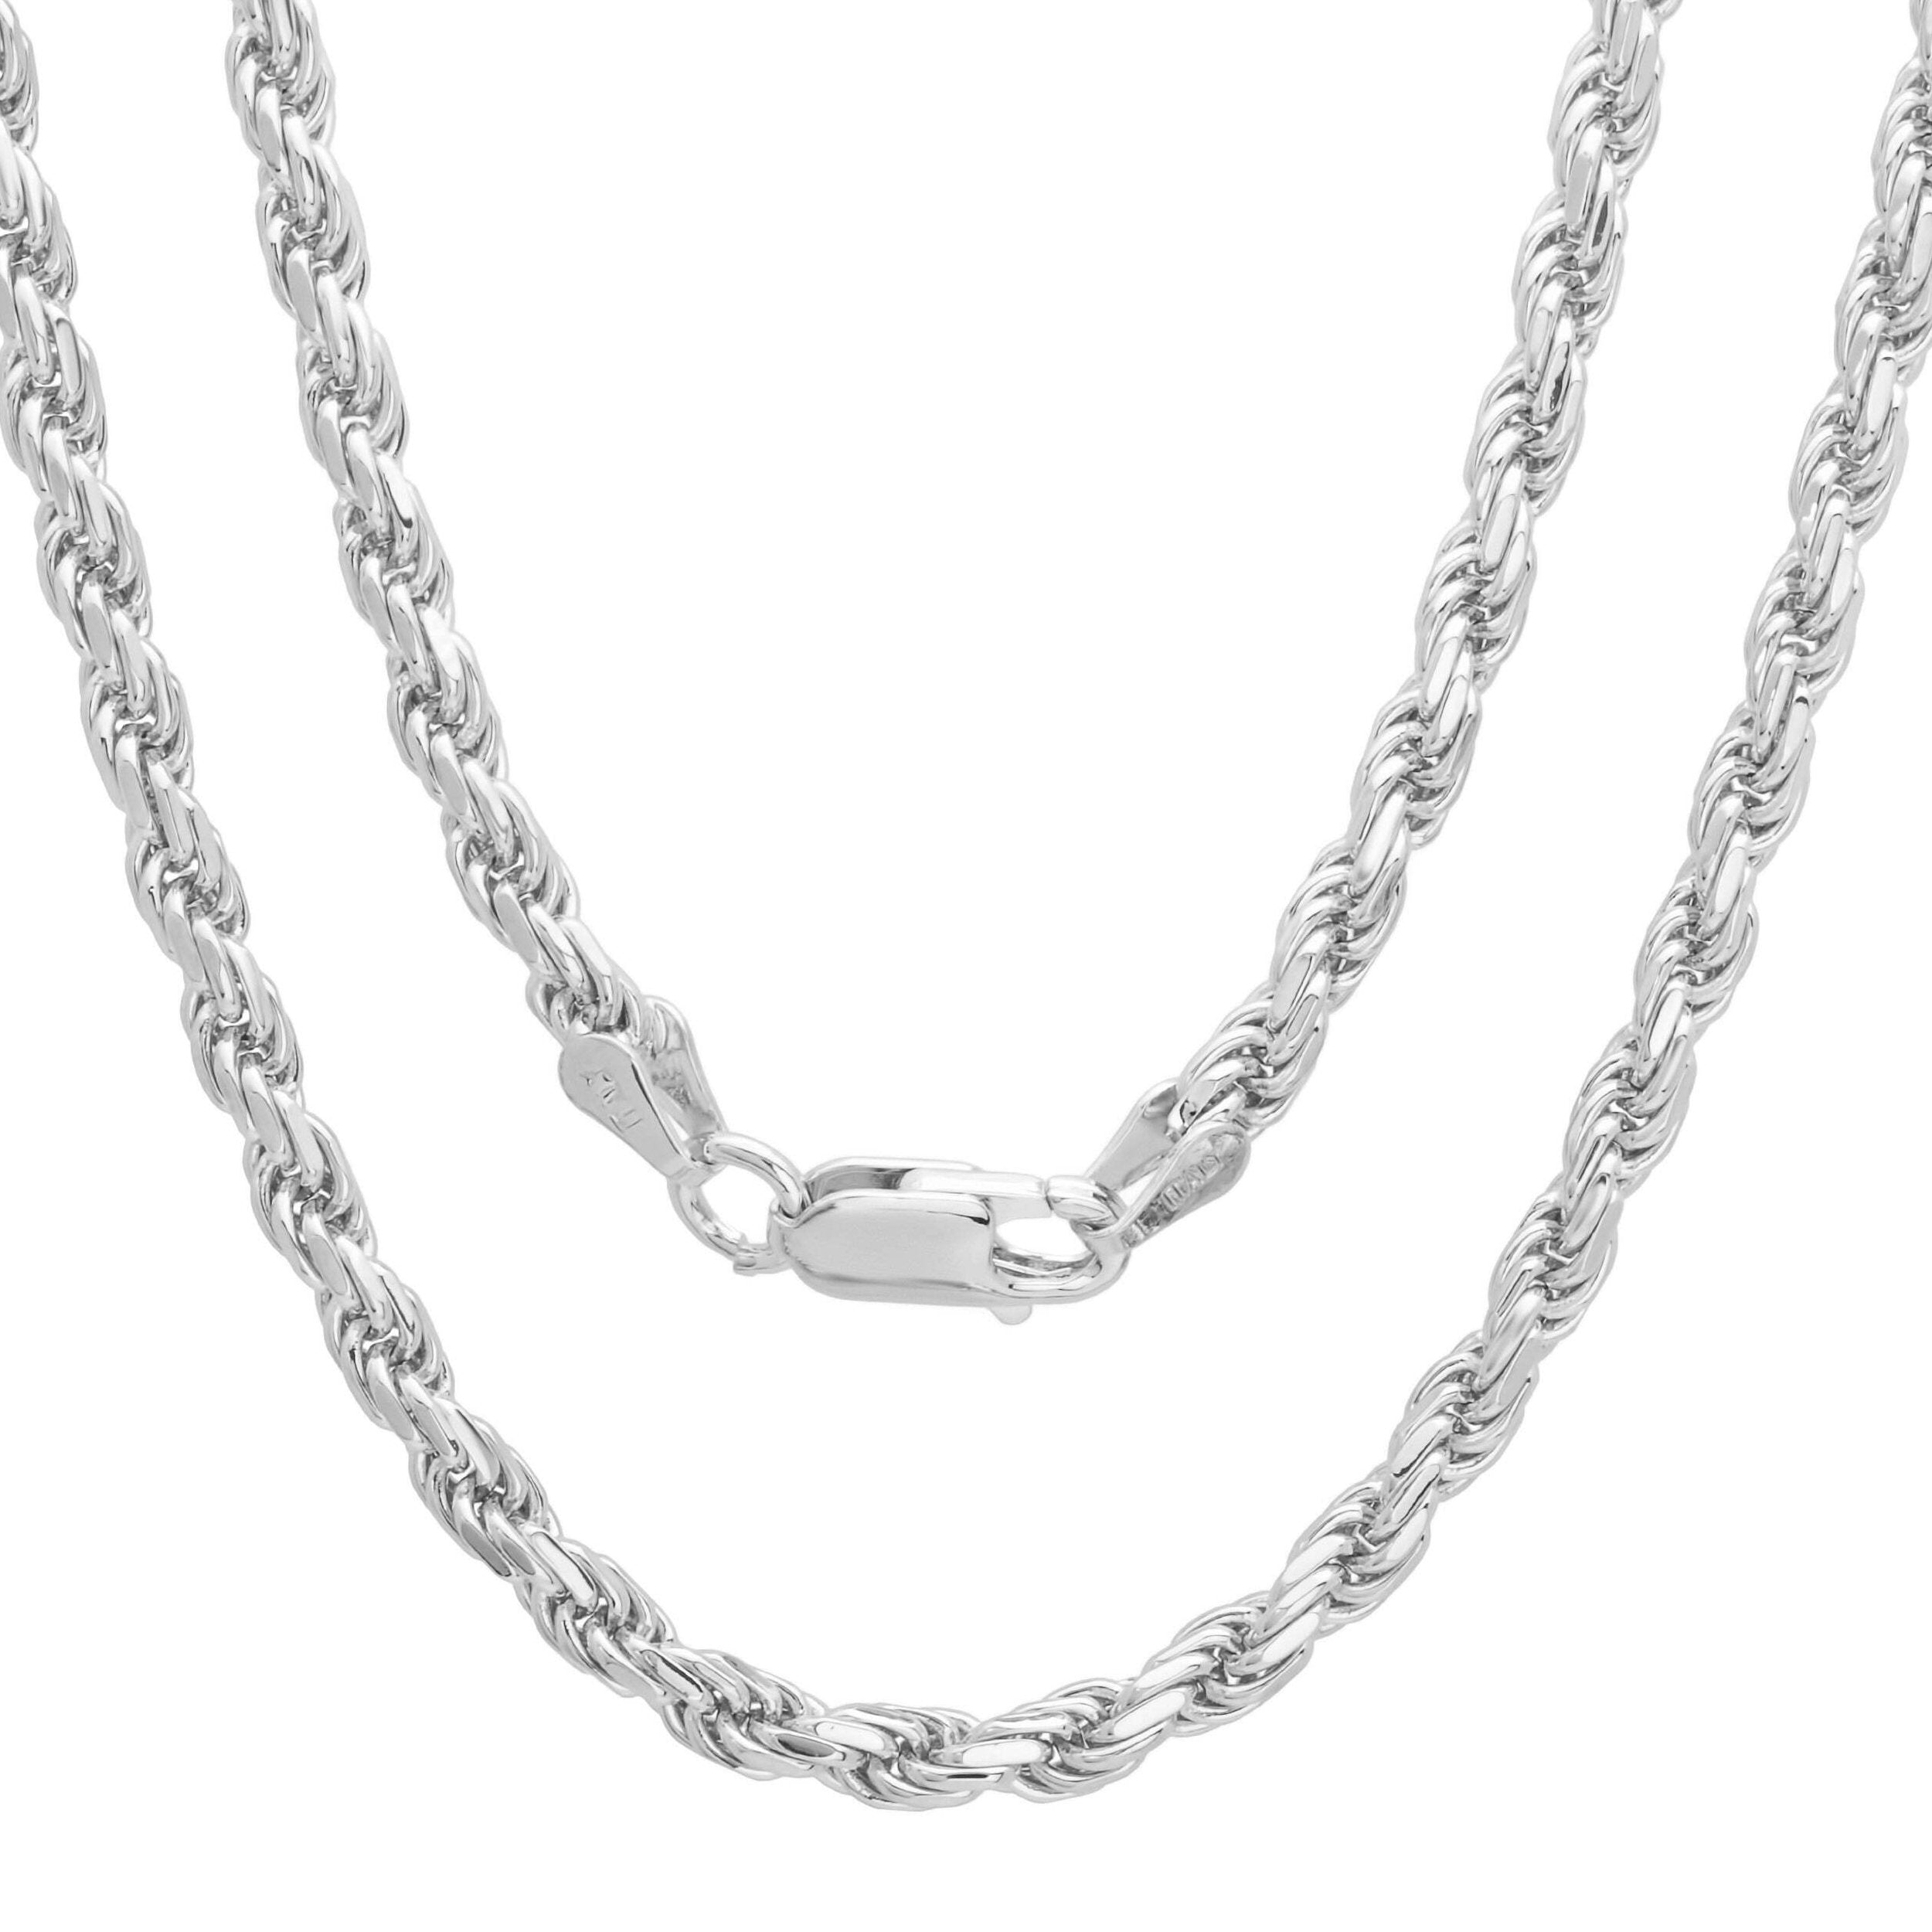 3.5MM 070 Rope Chain .925 Solid Sterling Silver Sizes 16"-30"